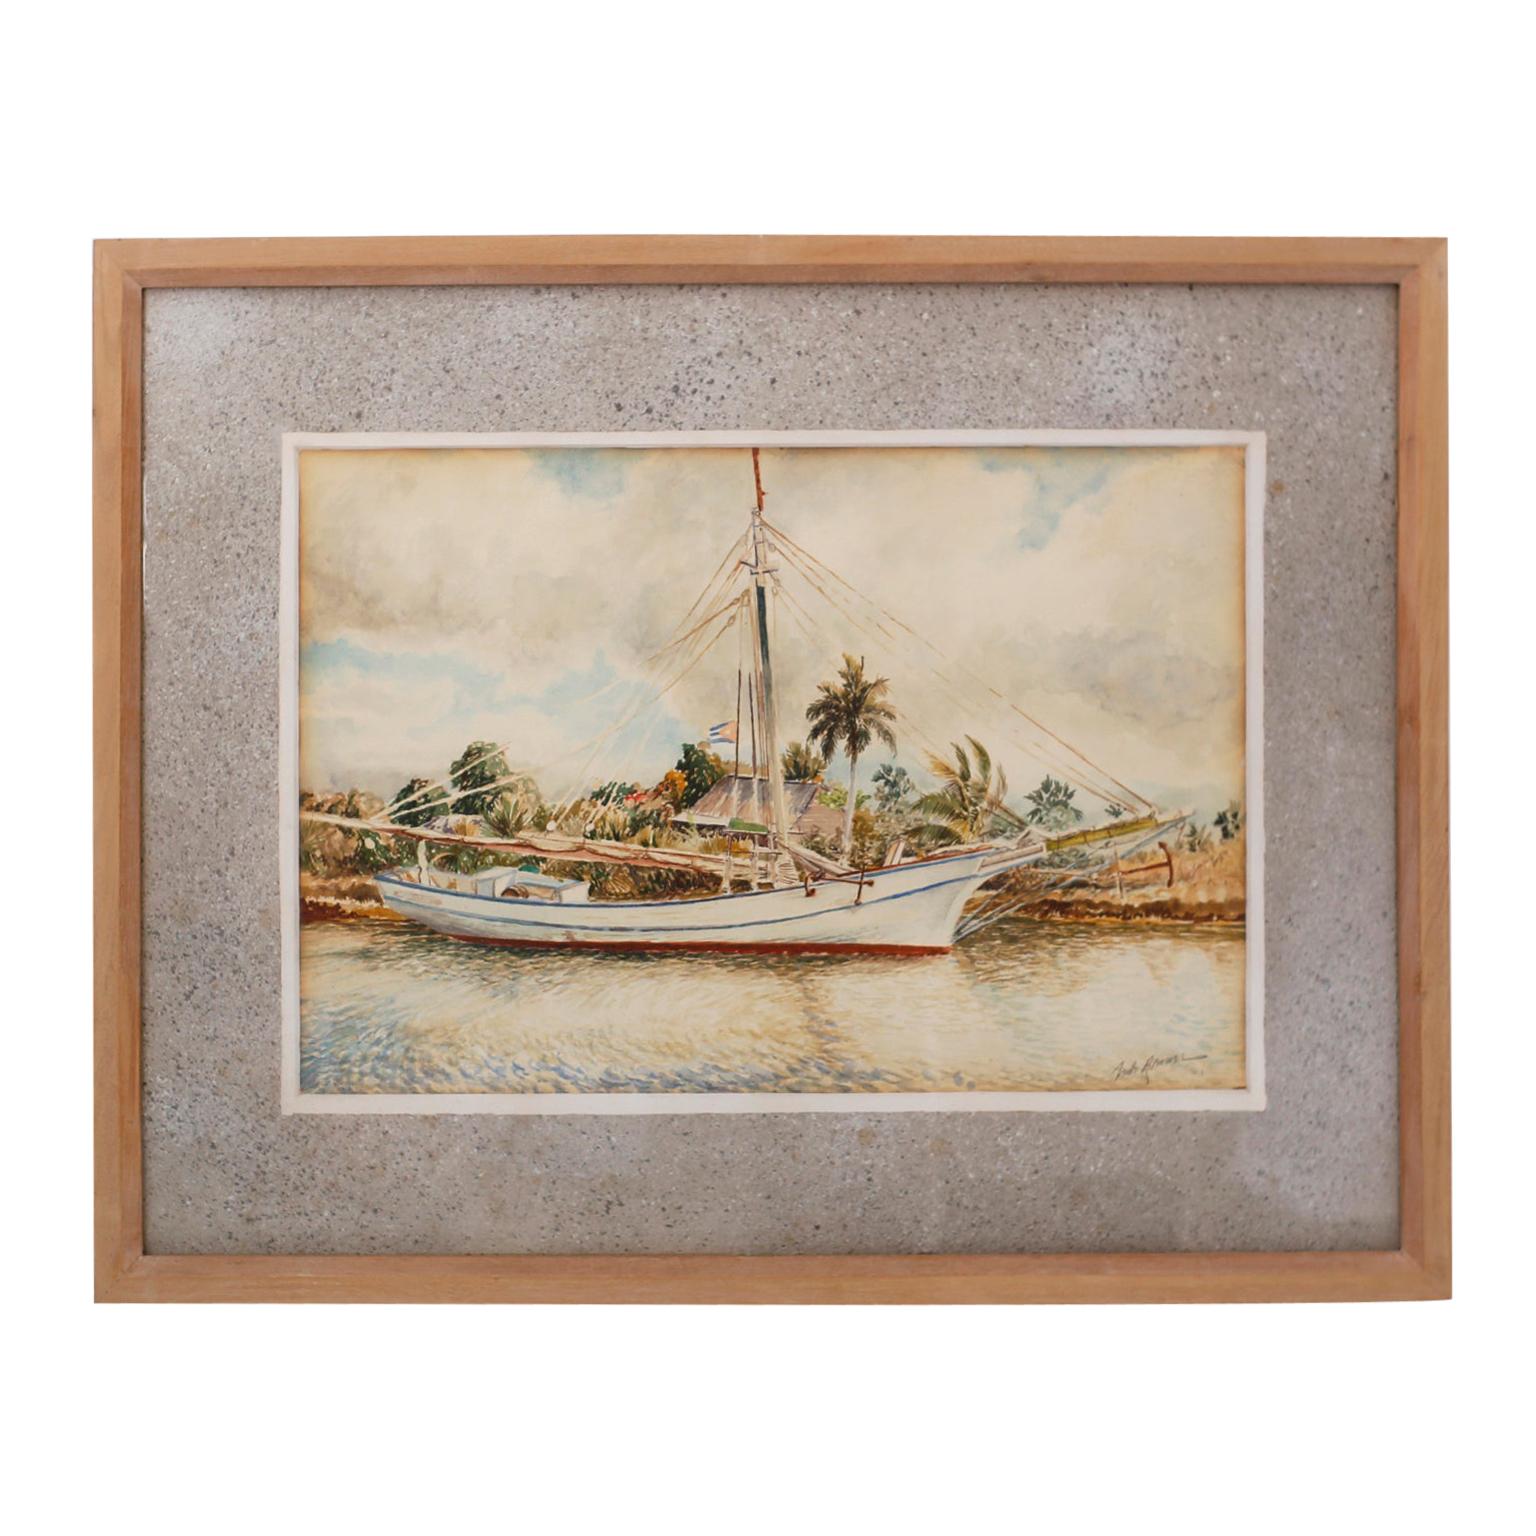 Framed Watercolor on Paper of a Cuban Sailboat